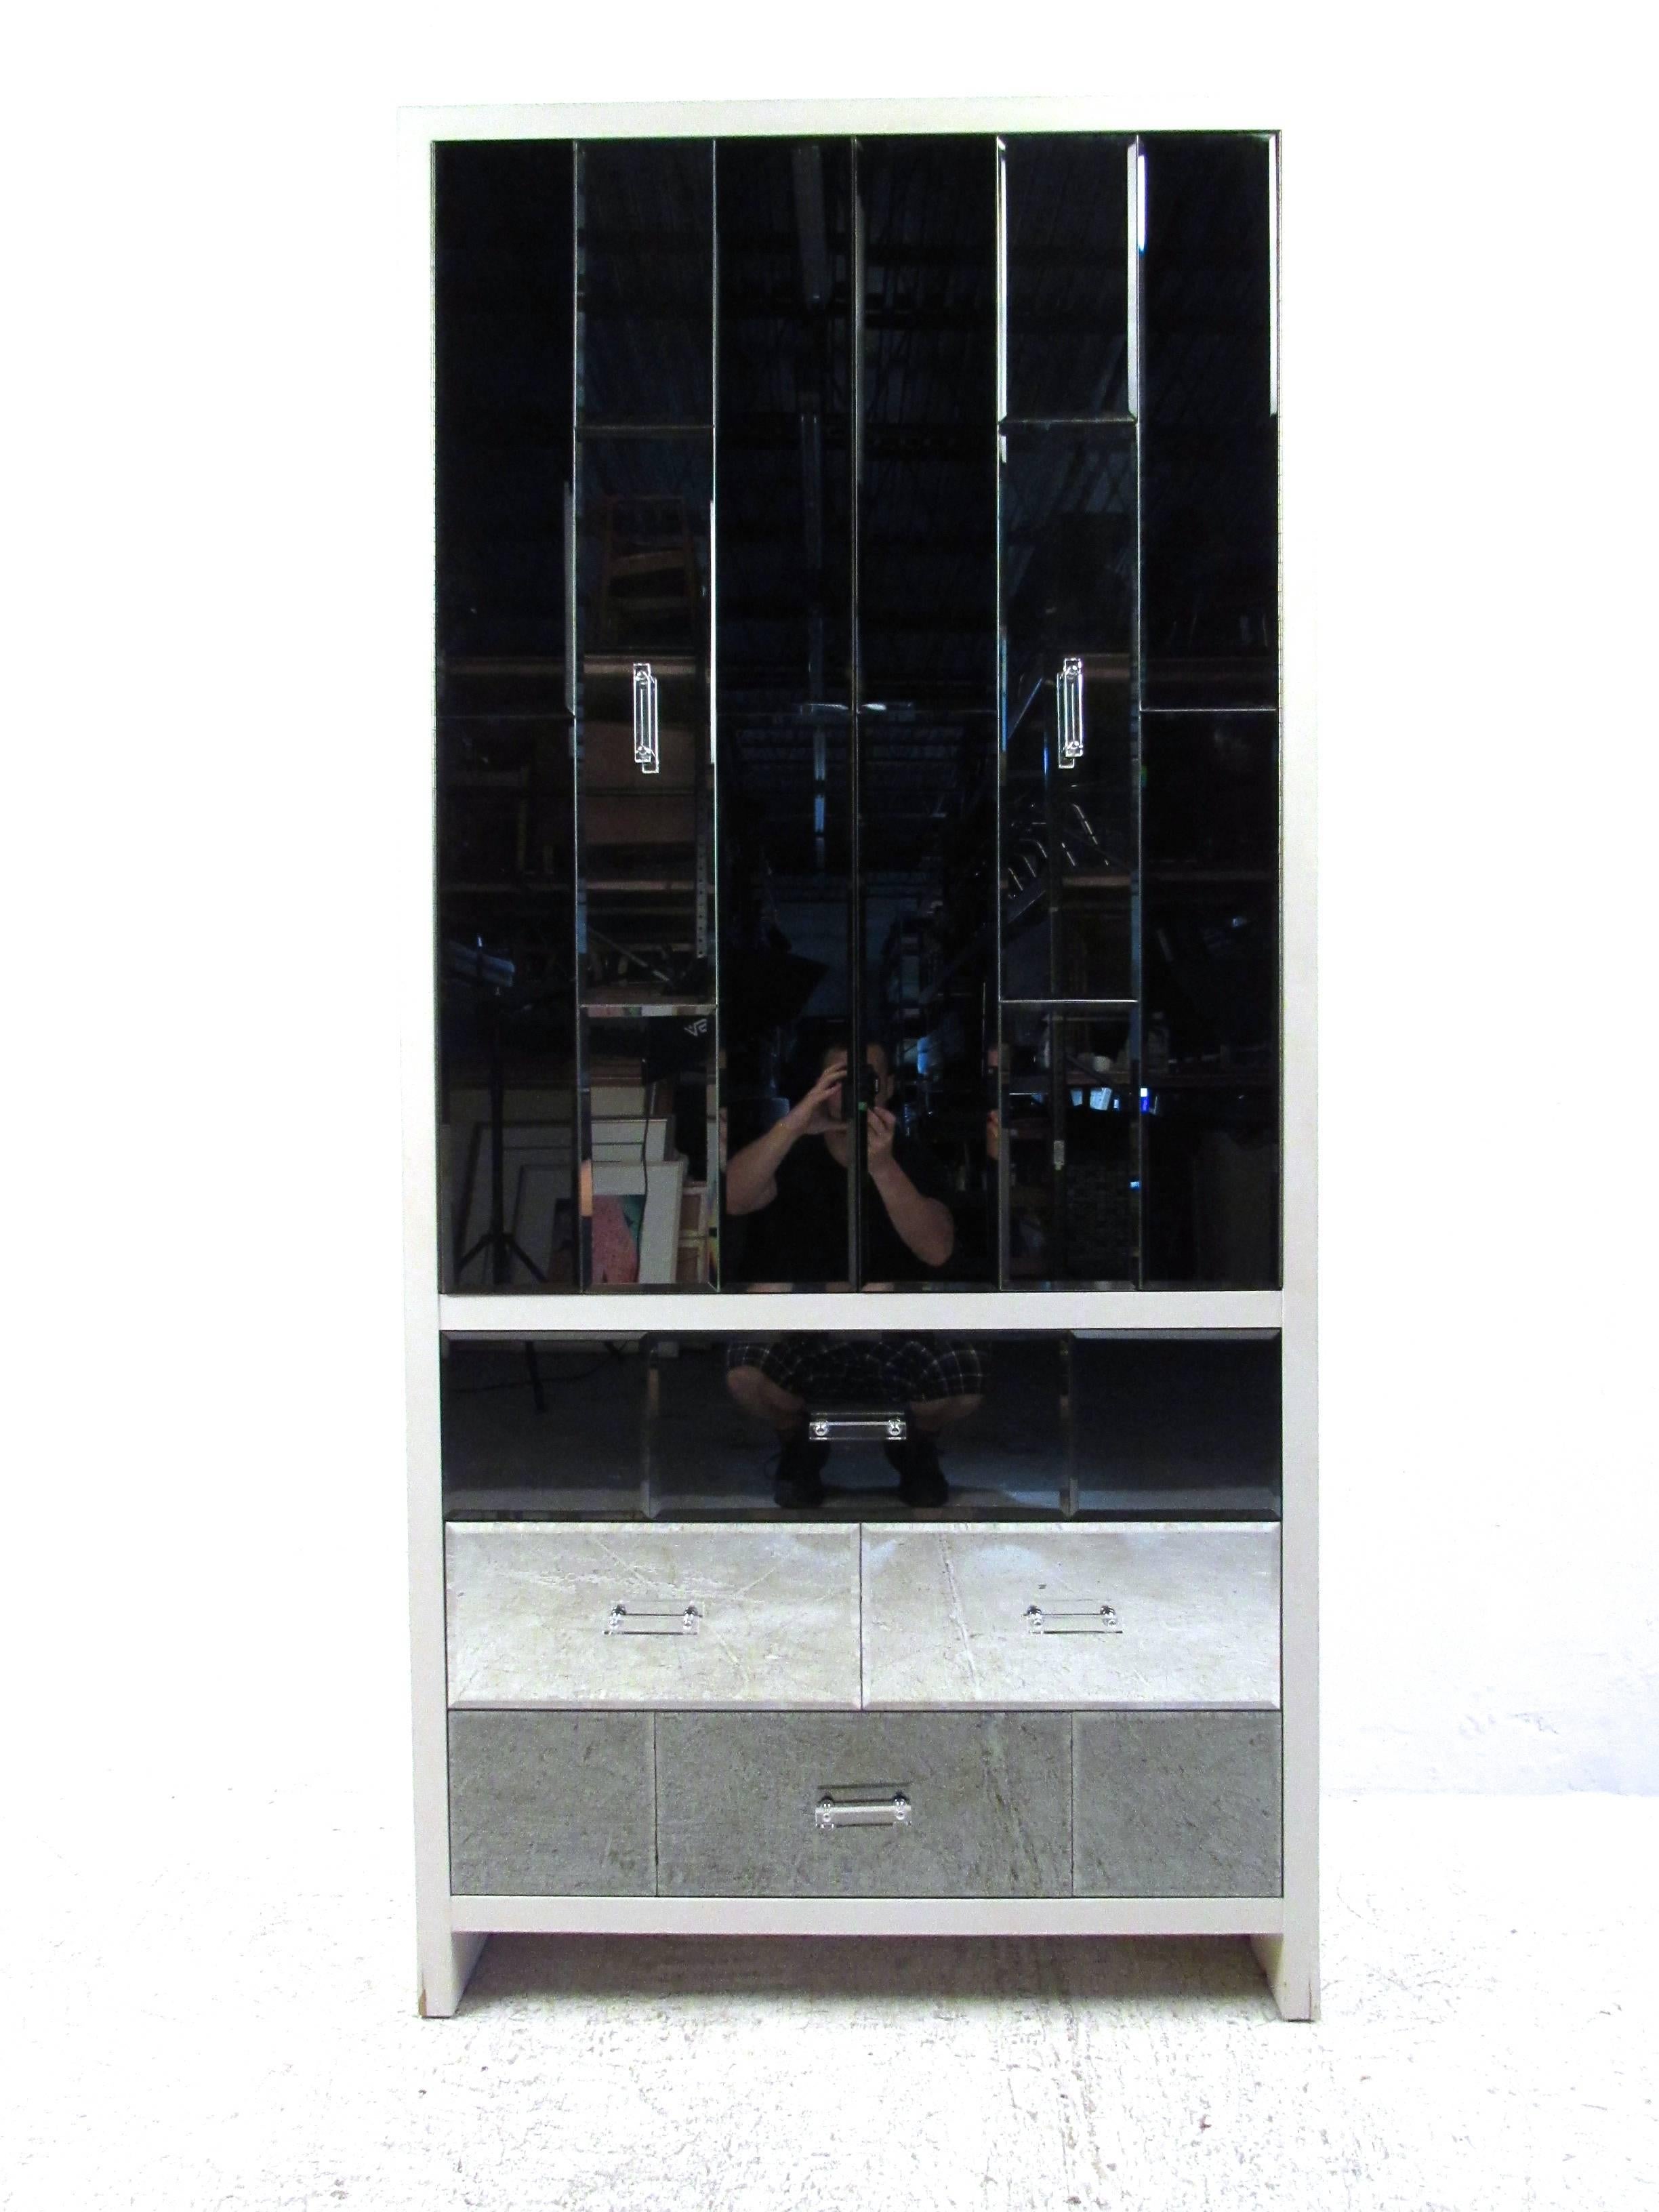 This unique beveled glass armoire features stylish Lucite handles, mirrored finish and plenty of interior storage. Wonderful vintage storage piece for a variety of interiors, this mirror front cabinet makes the perfect addition to any Mid-Century